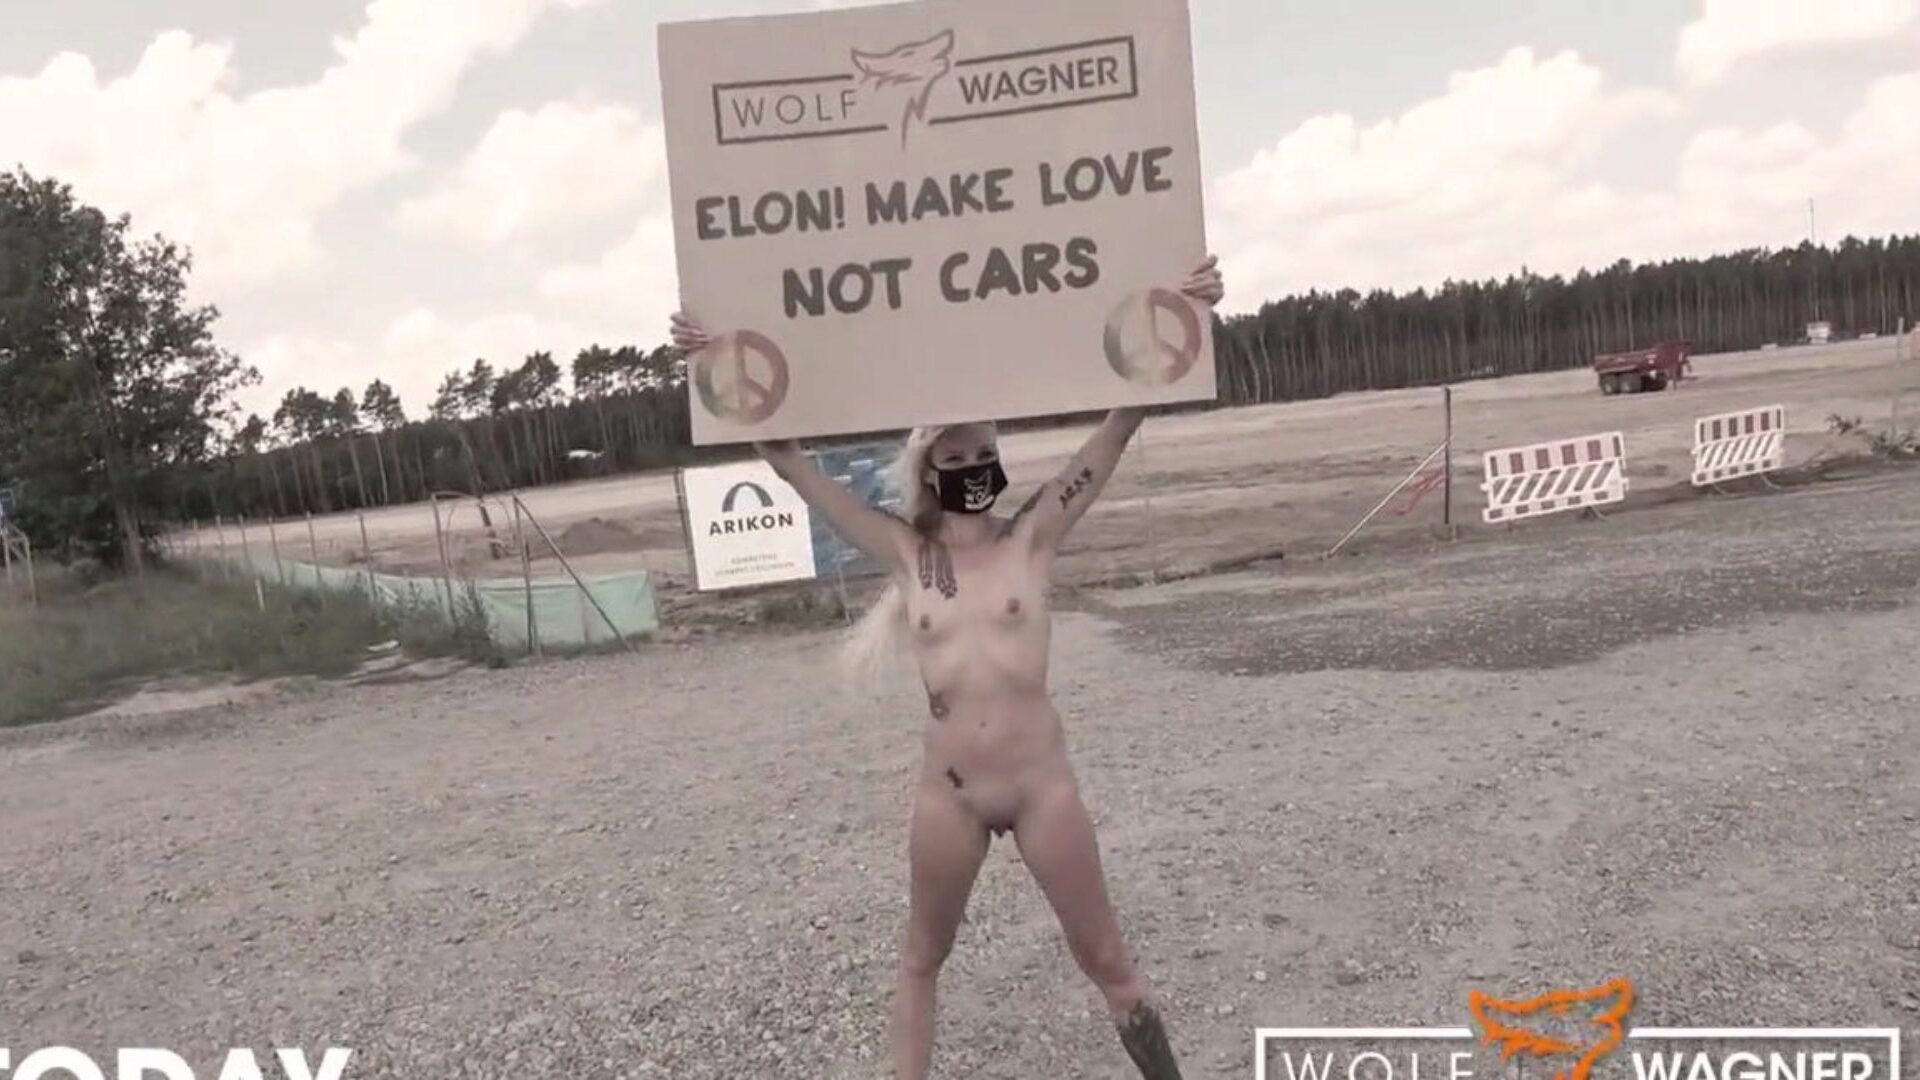 Tesla Protest! Kitty Blair naked in public w/ message for Elon! + Public Fuck! WOLF WAGNER